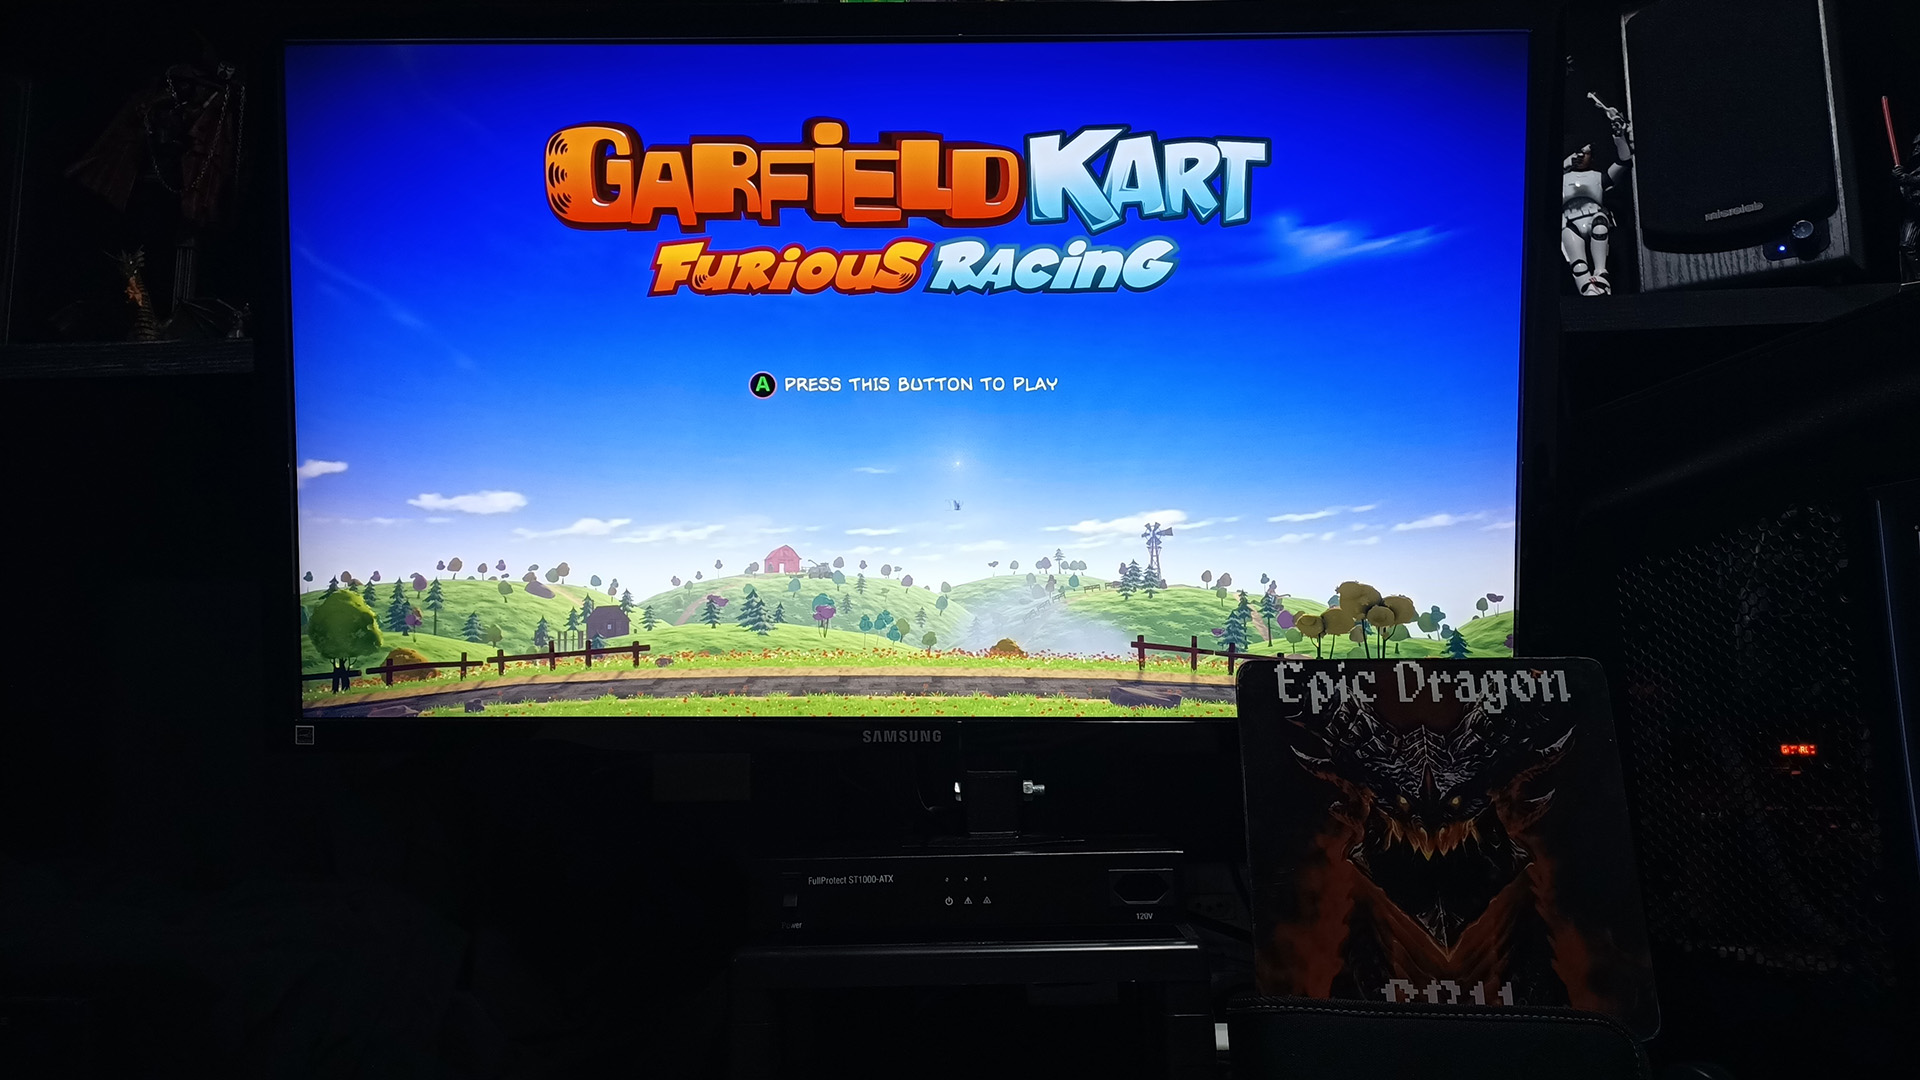 Garfield Kart Furious Racing: Spooky Manor [Time Trial: Lap Time] time of 0:00:44.718